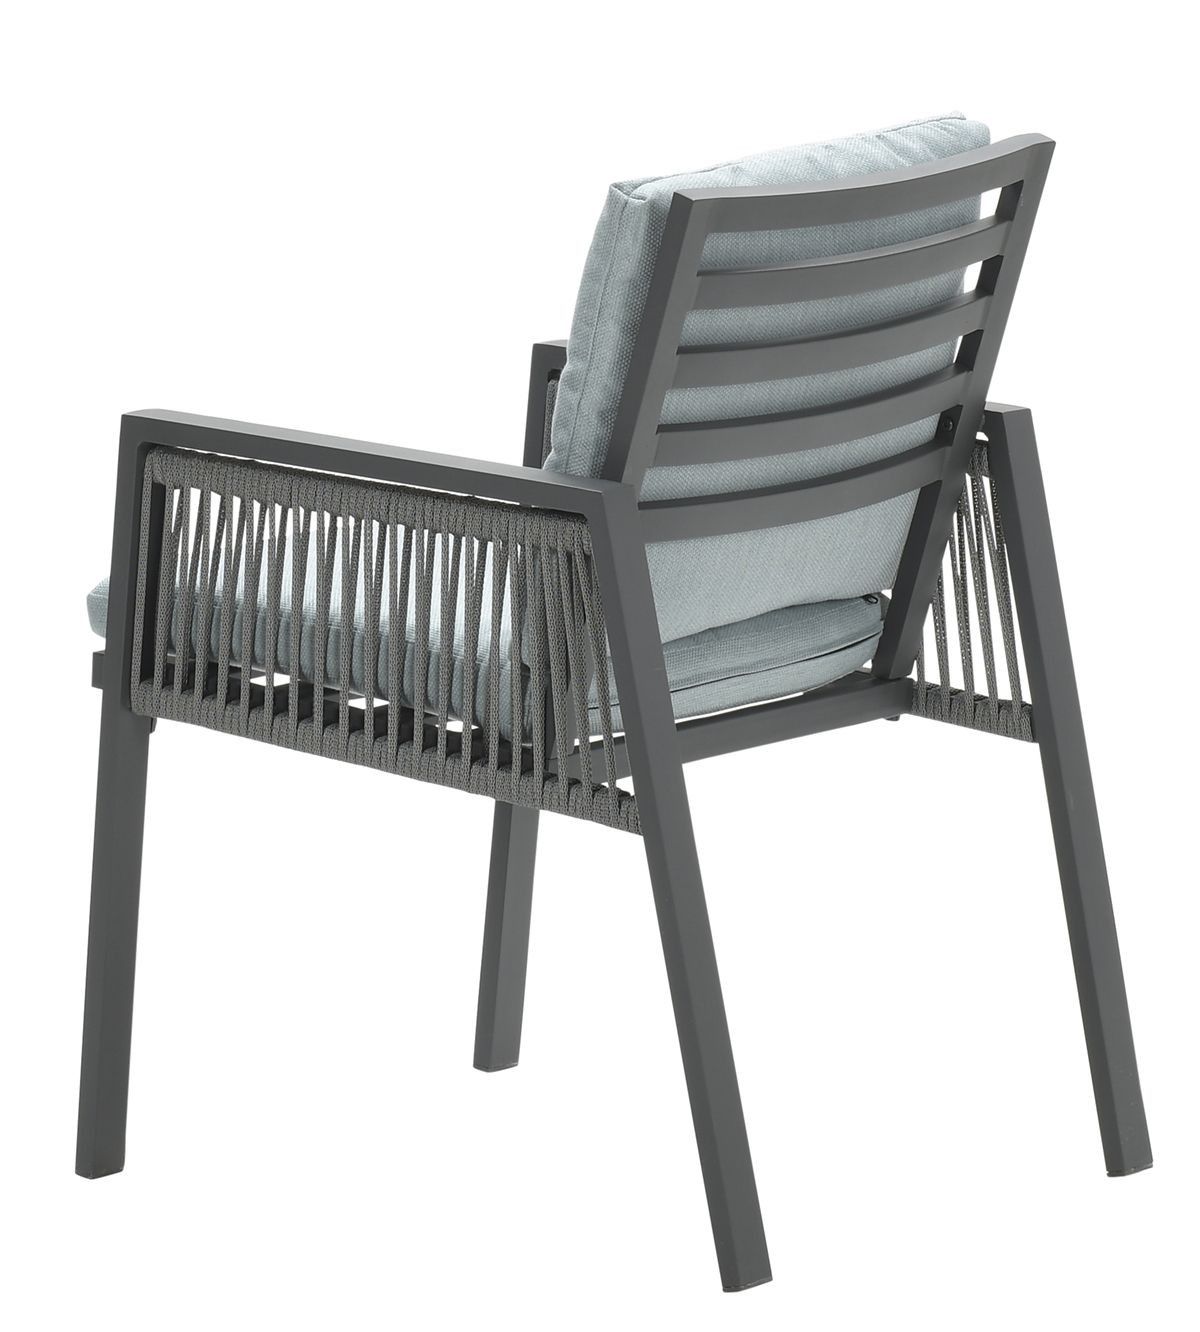 Garden Impressions - Andrea Dining Chair - Beyond outdoor living